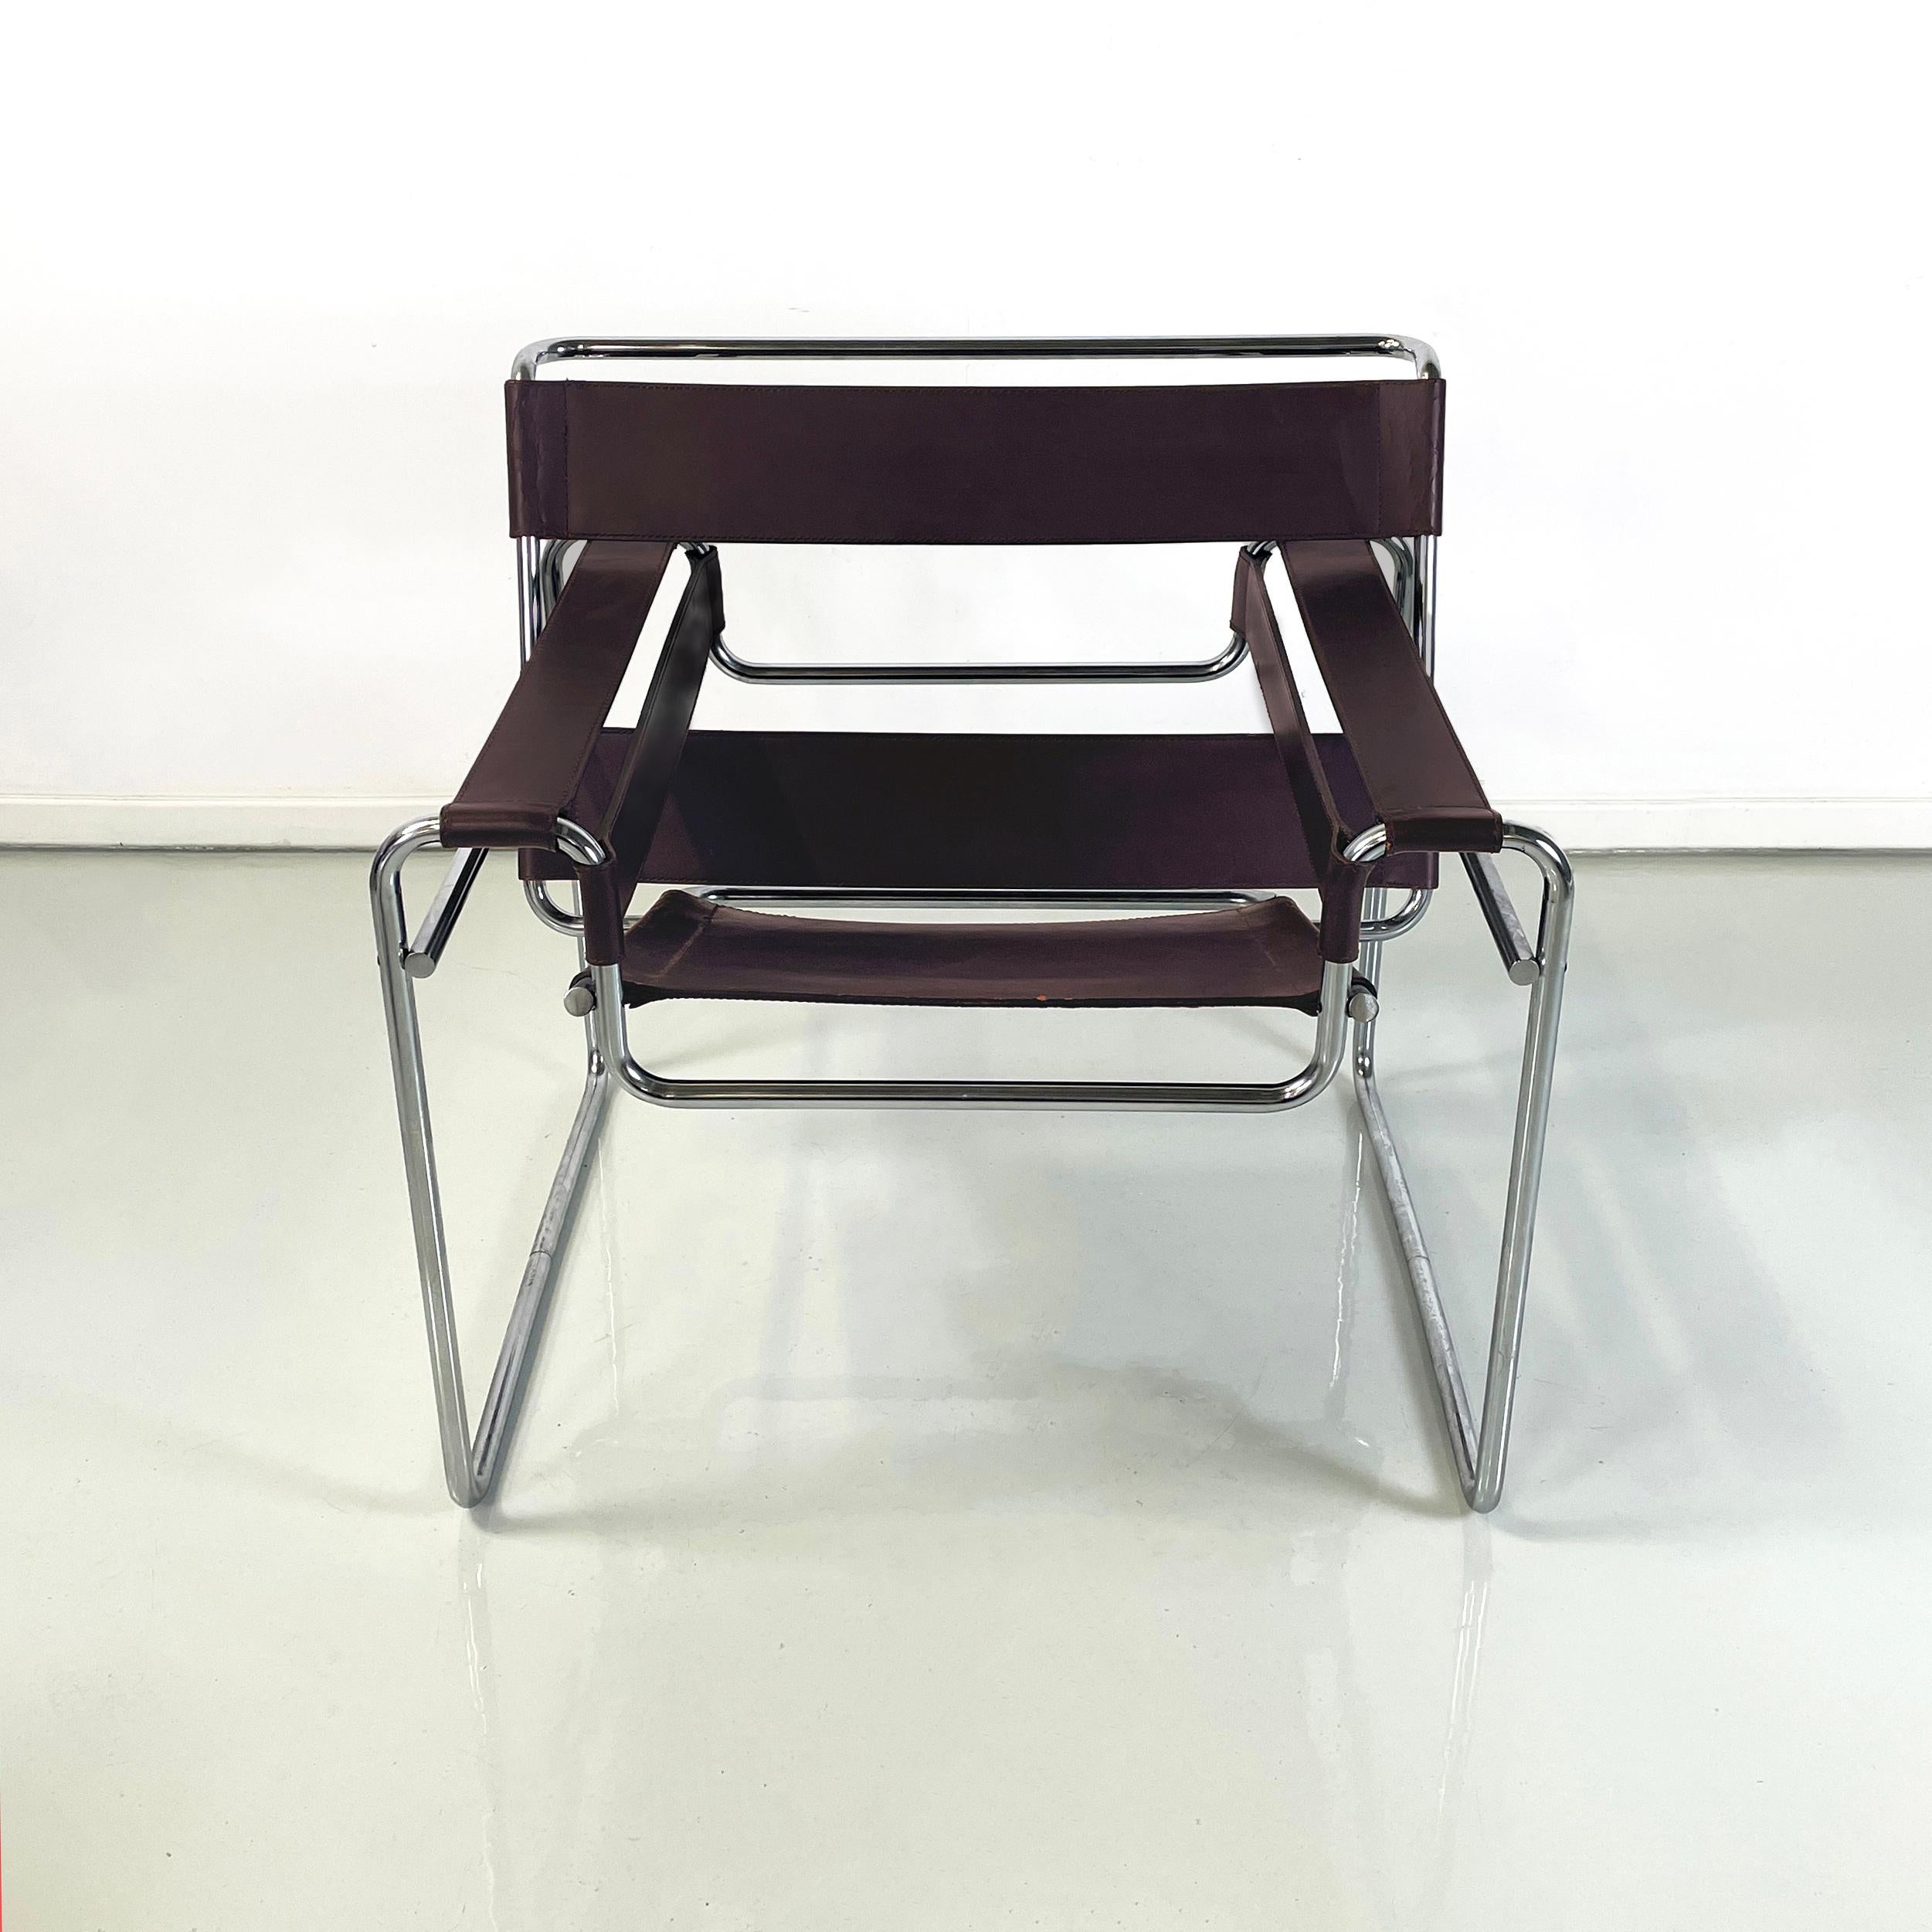 Italian modern Brown leather and chromed steel armchair Wassily or B3 by Marcel Breuer for Gavina, 1970s
Iconic armchair mod. Wassily or B3, with chromed tubular steel structure. The seat, armrests and backrest are made up of bands entirely in dark